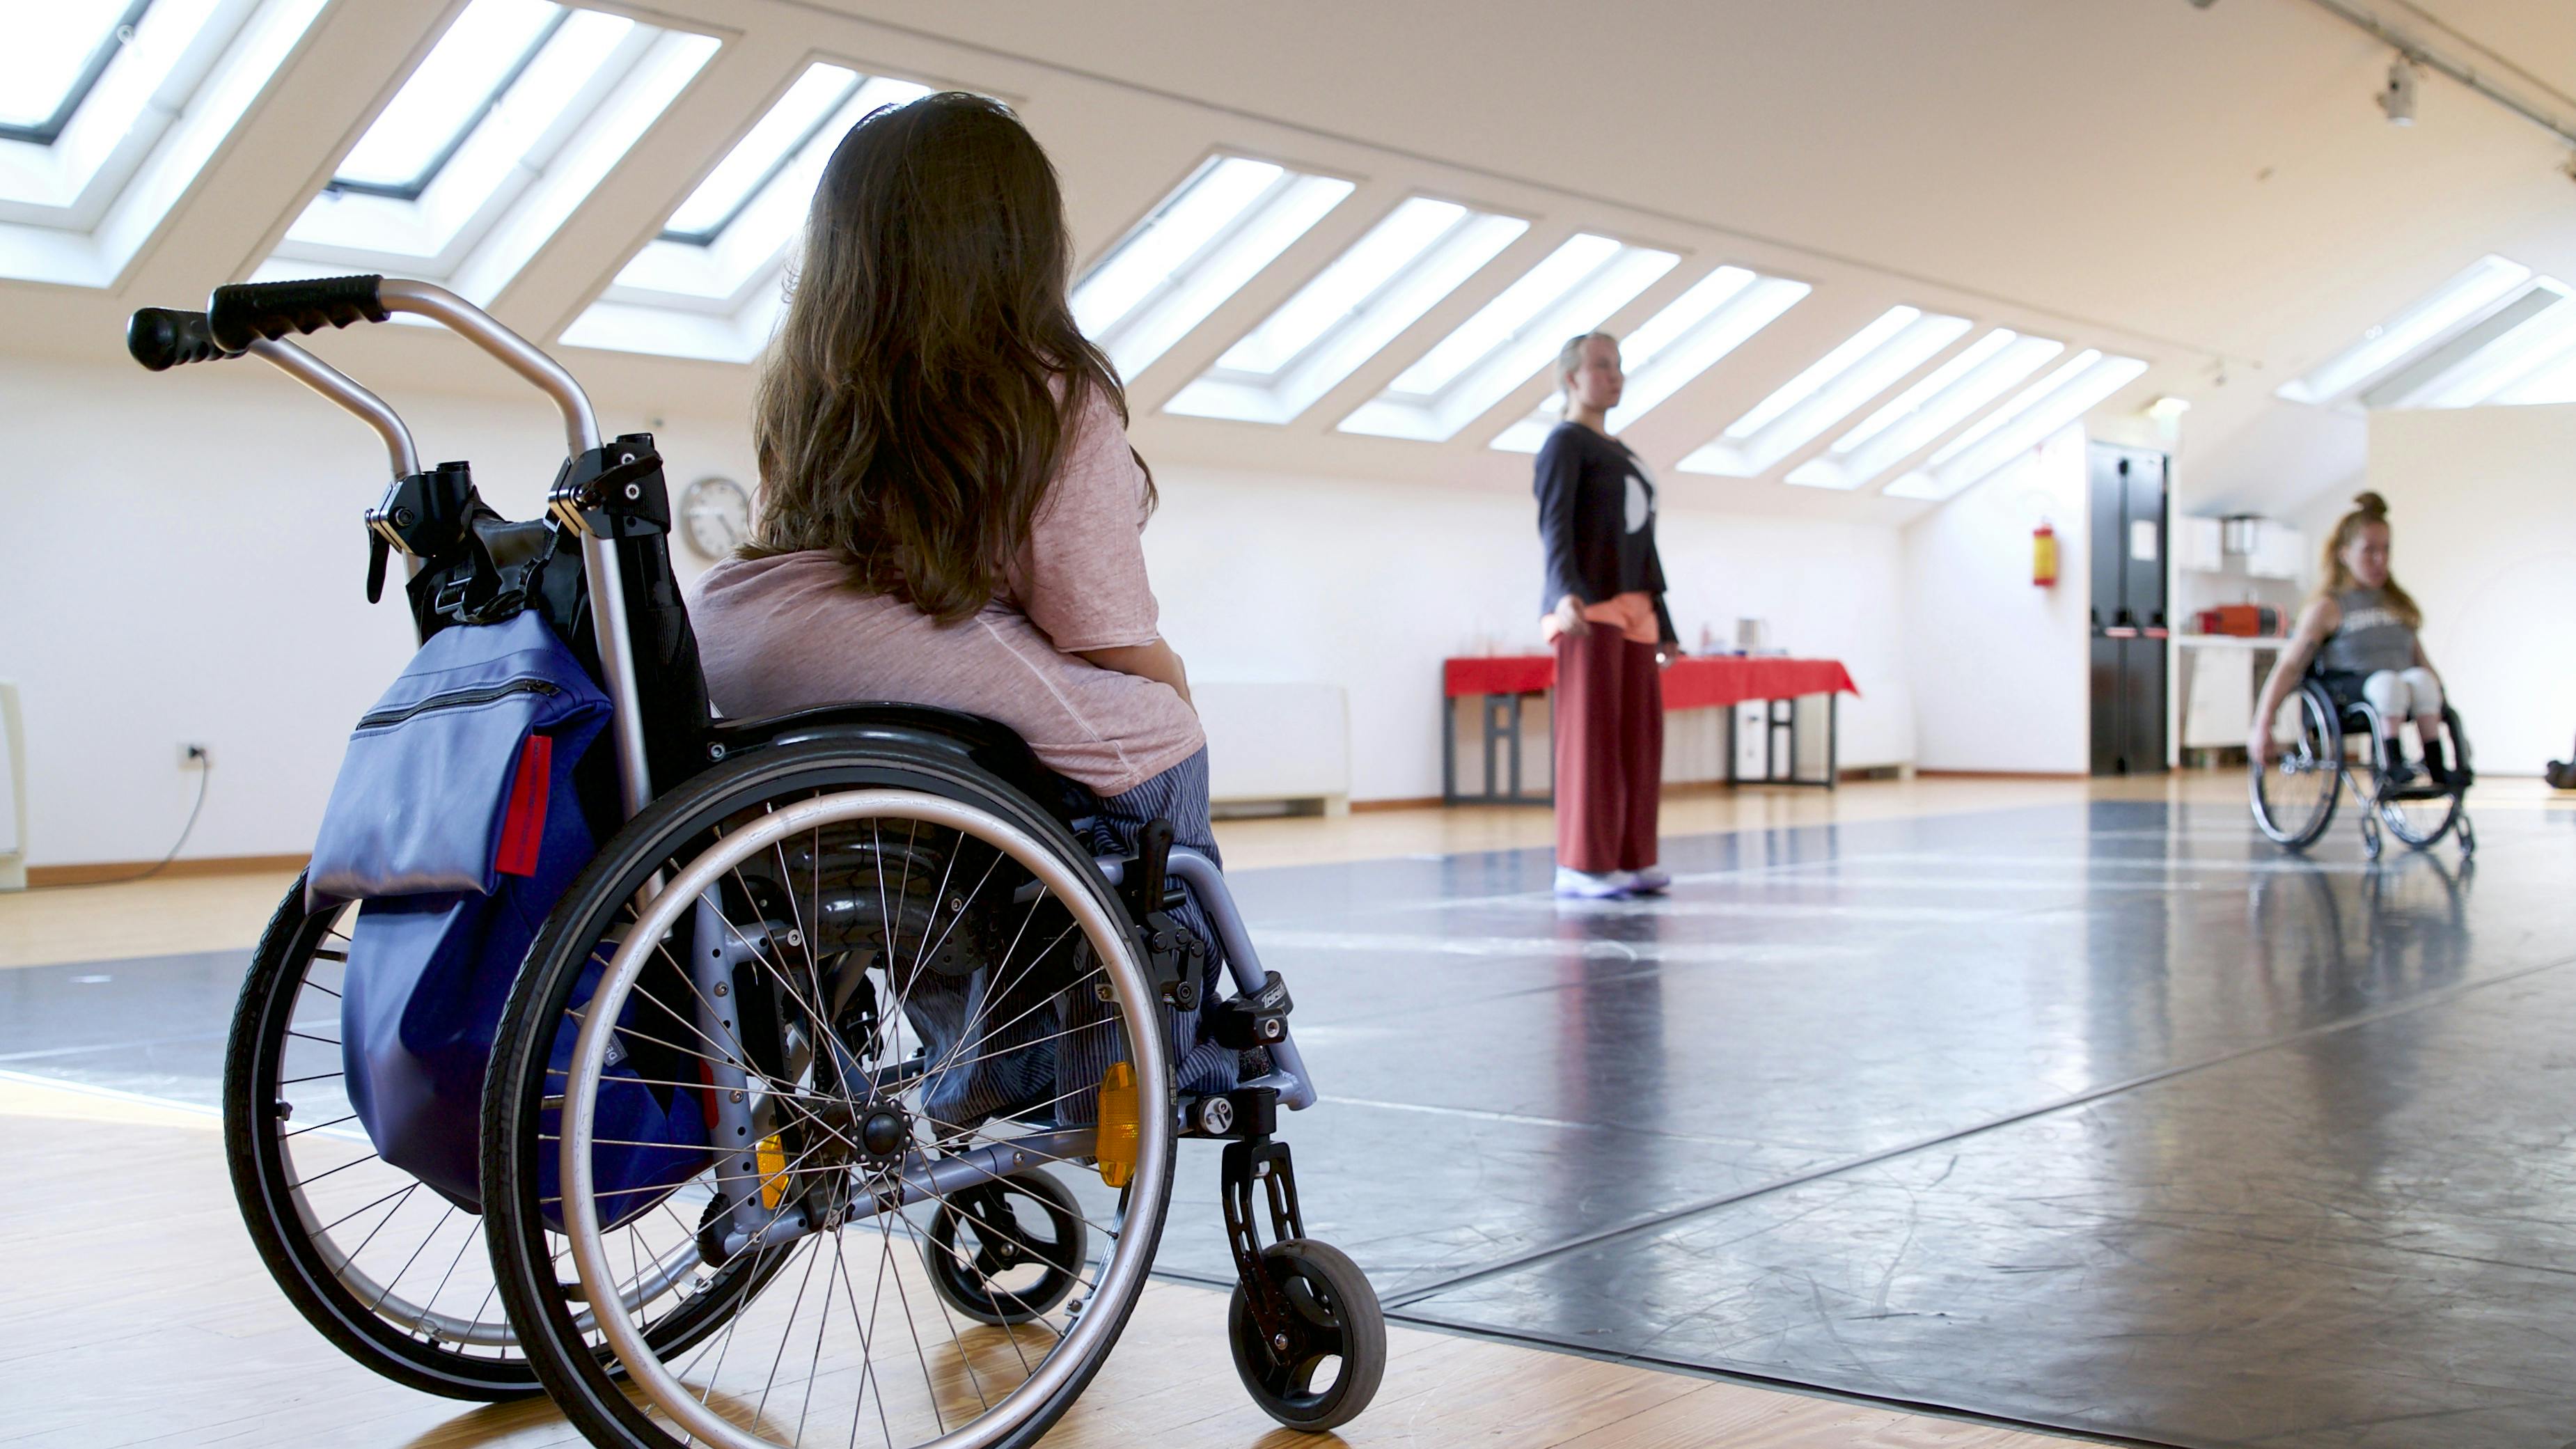 In the foreground Chiara Bersani, on her back, in a wheelchair, observes the dancers of Danskomapaniet SPINN moving through space. In the distance we see a dancer standing and a second one sitting in a wheelchair.